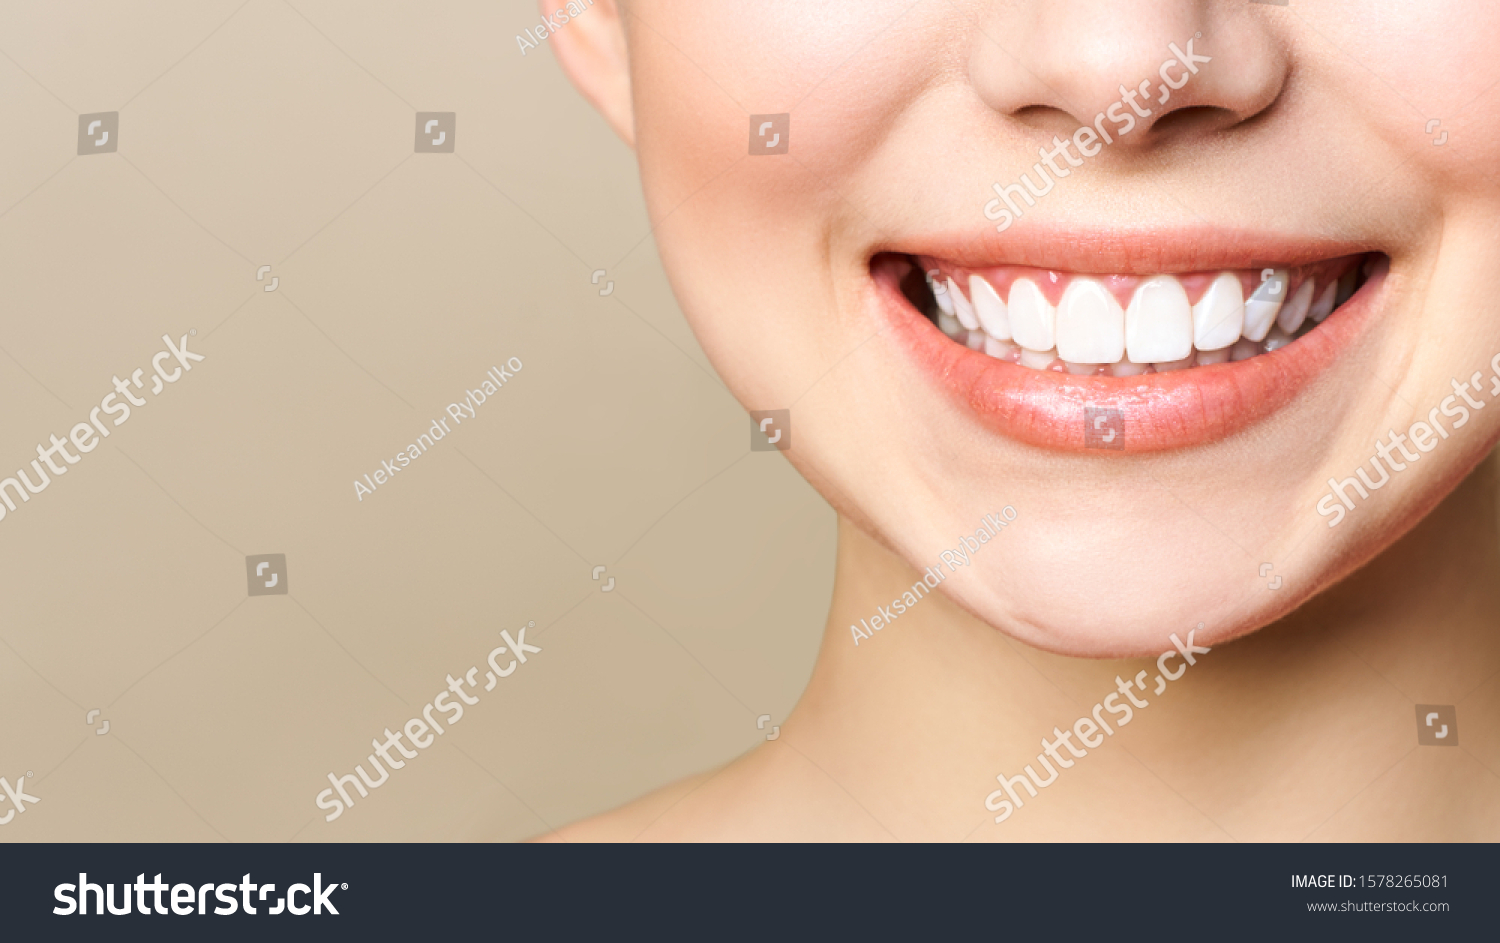 Perfect healthy teeth smile of a young woman. Teeth whitening. Dental clinic patient. Image symbolizes oral care dentistry, stomatology. Dentistry image #1578265081